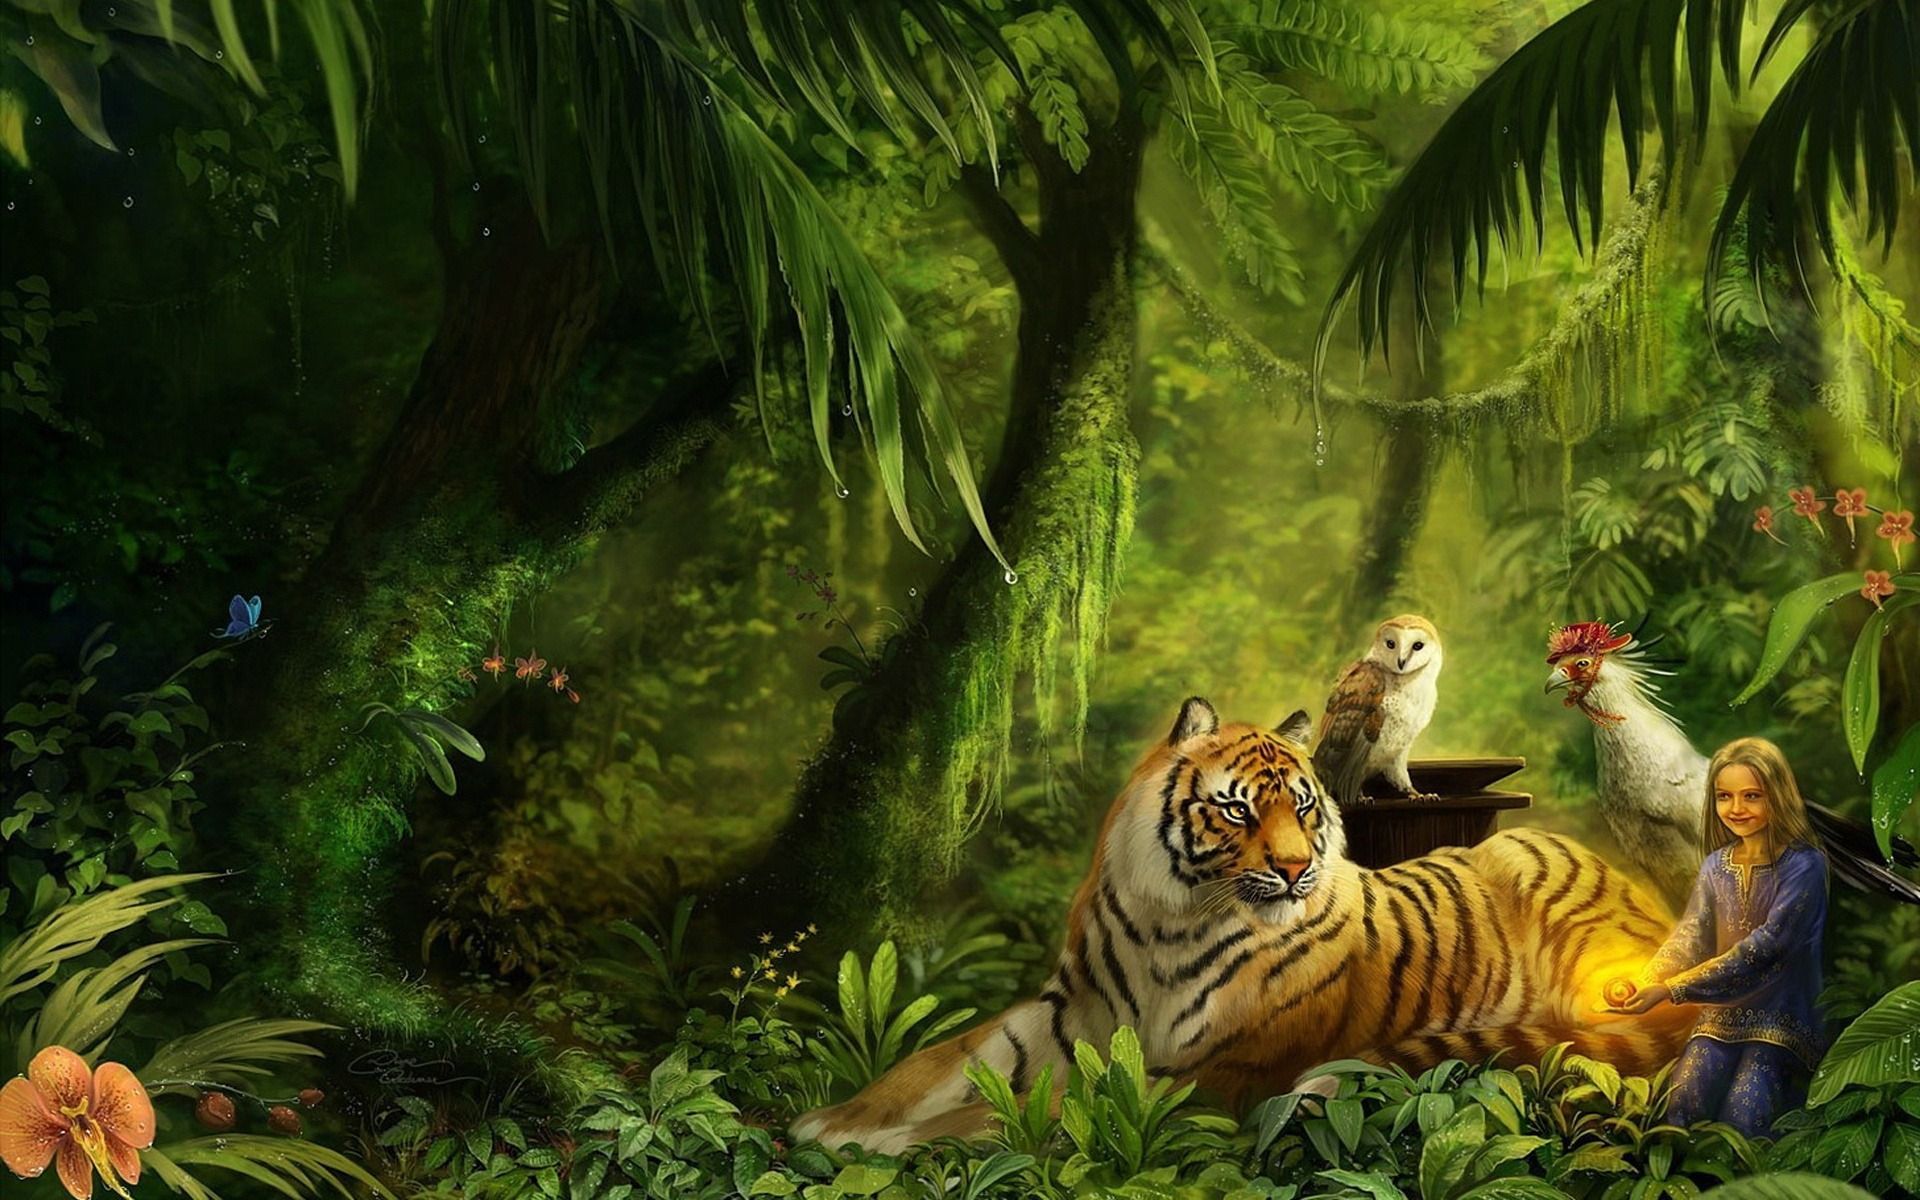 Download HD Wallpapers of Tigers | Free Desk Wallpapers